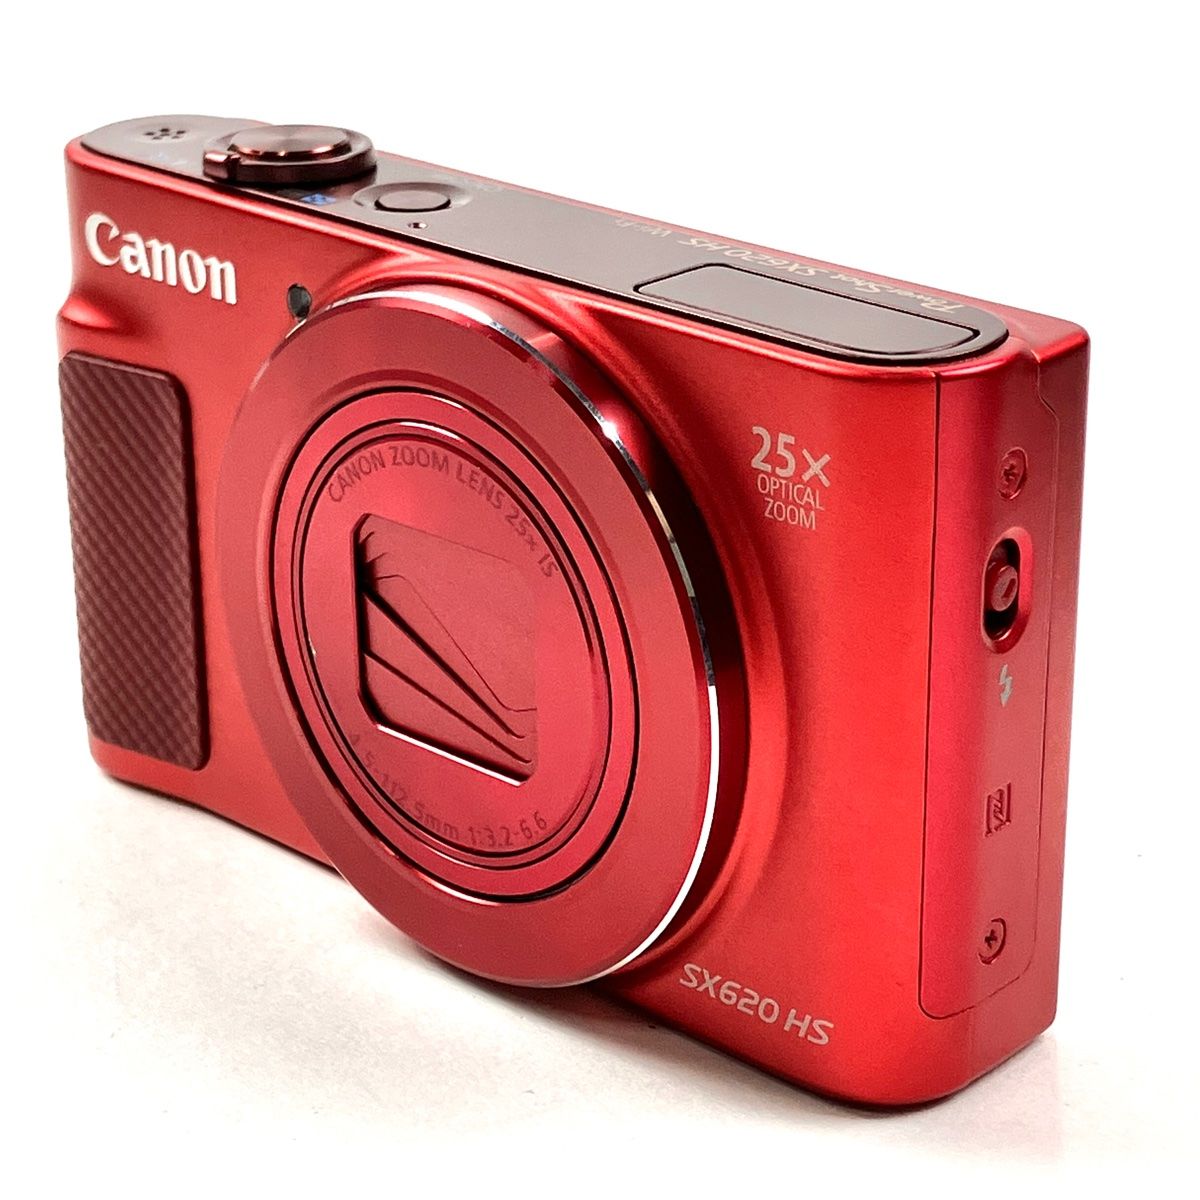 Canon Powershot SX620 HS RED